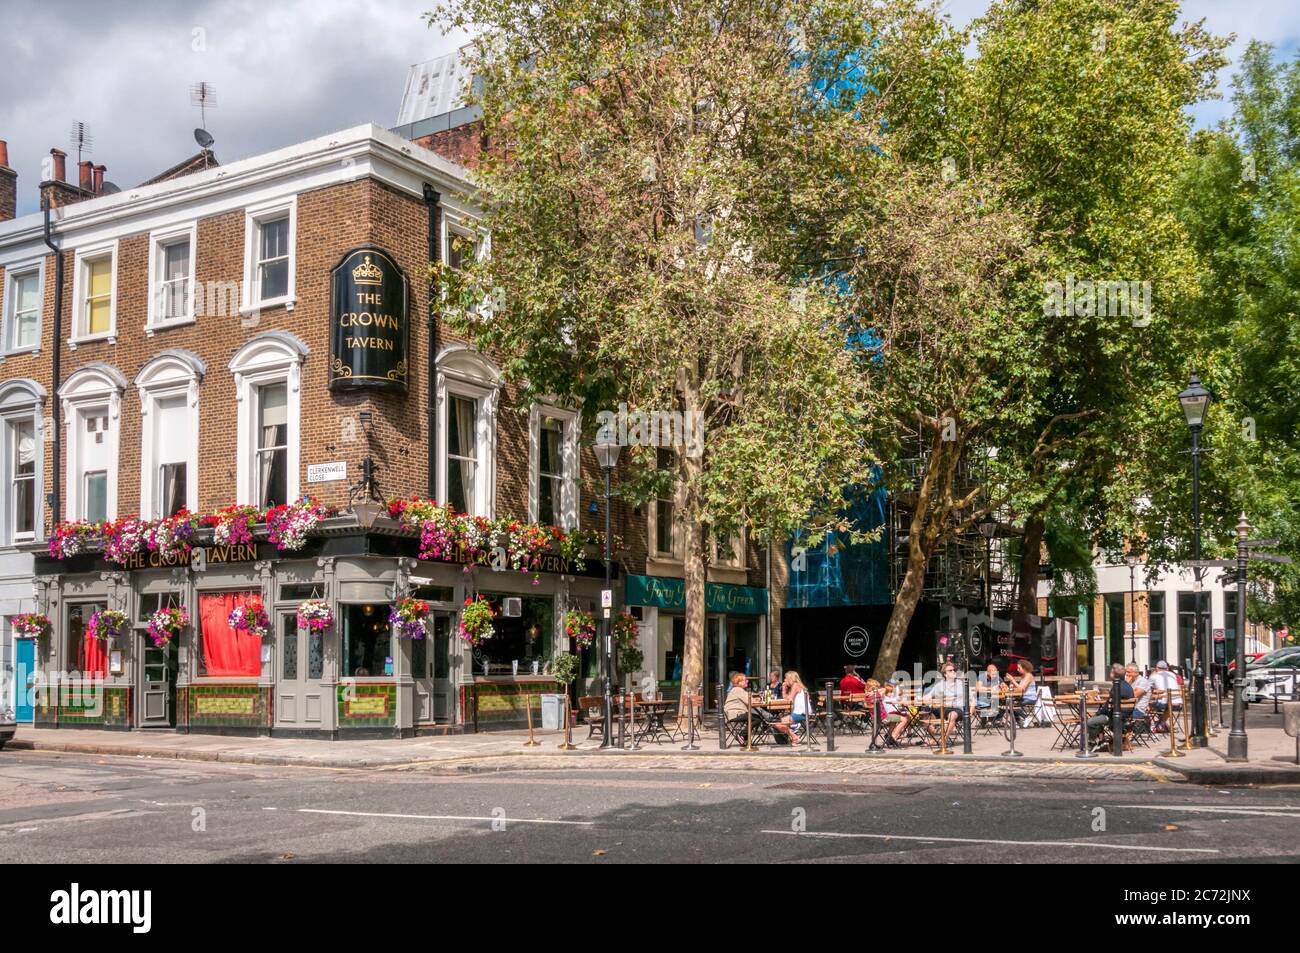 The Crown Tavern public house on Clerkenwell Green. Stock Photo